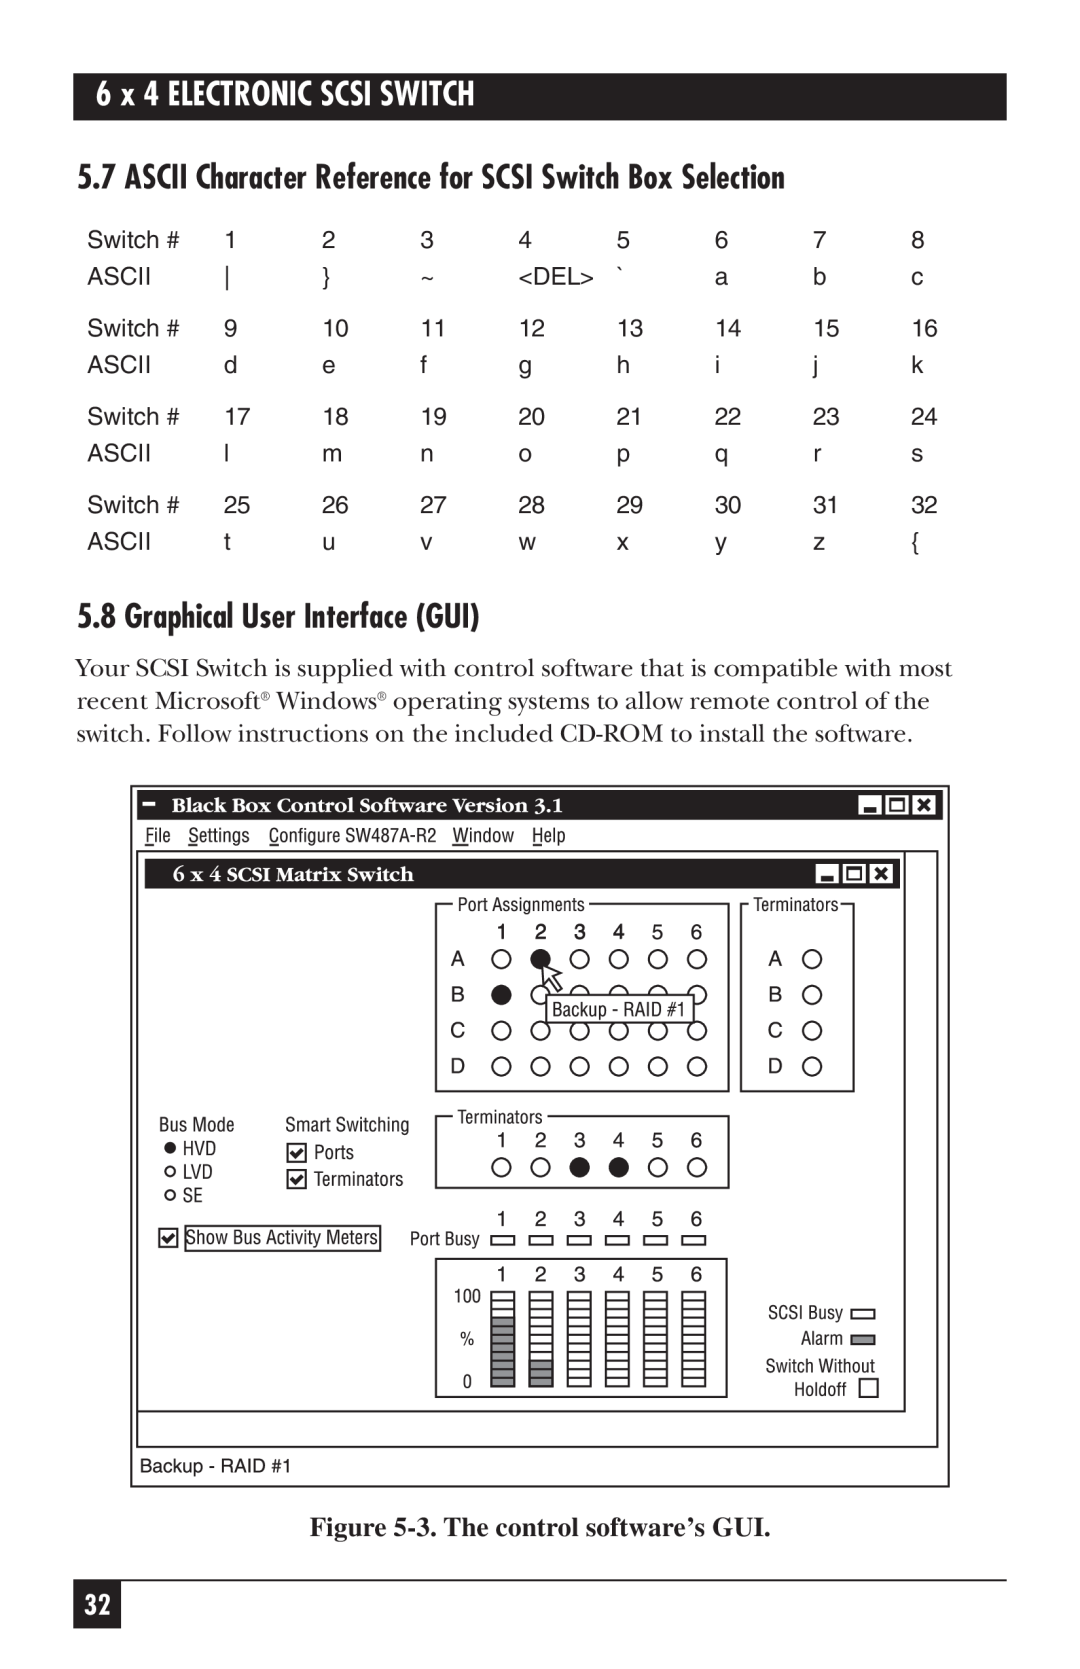 Black Box SW487A-R2 manual ASCII Character Reference for SCSI Switch Box Selection, Graphical User Interface GUI 